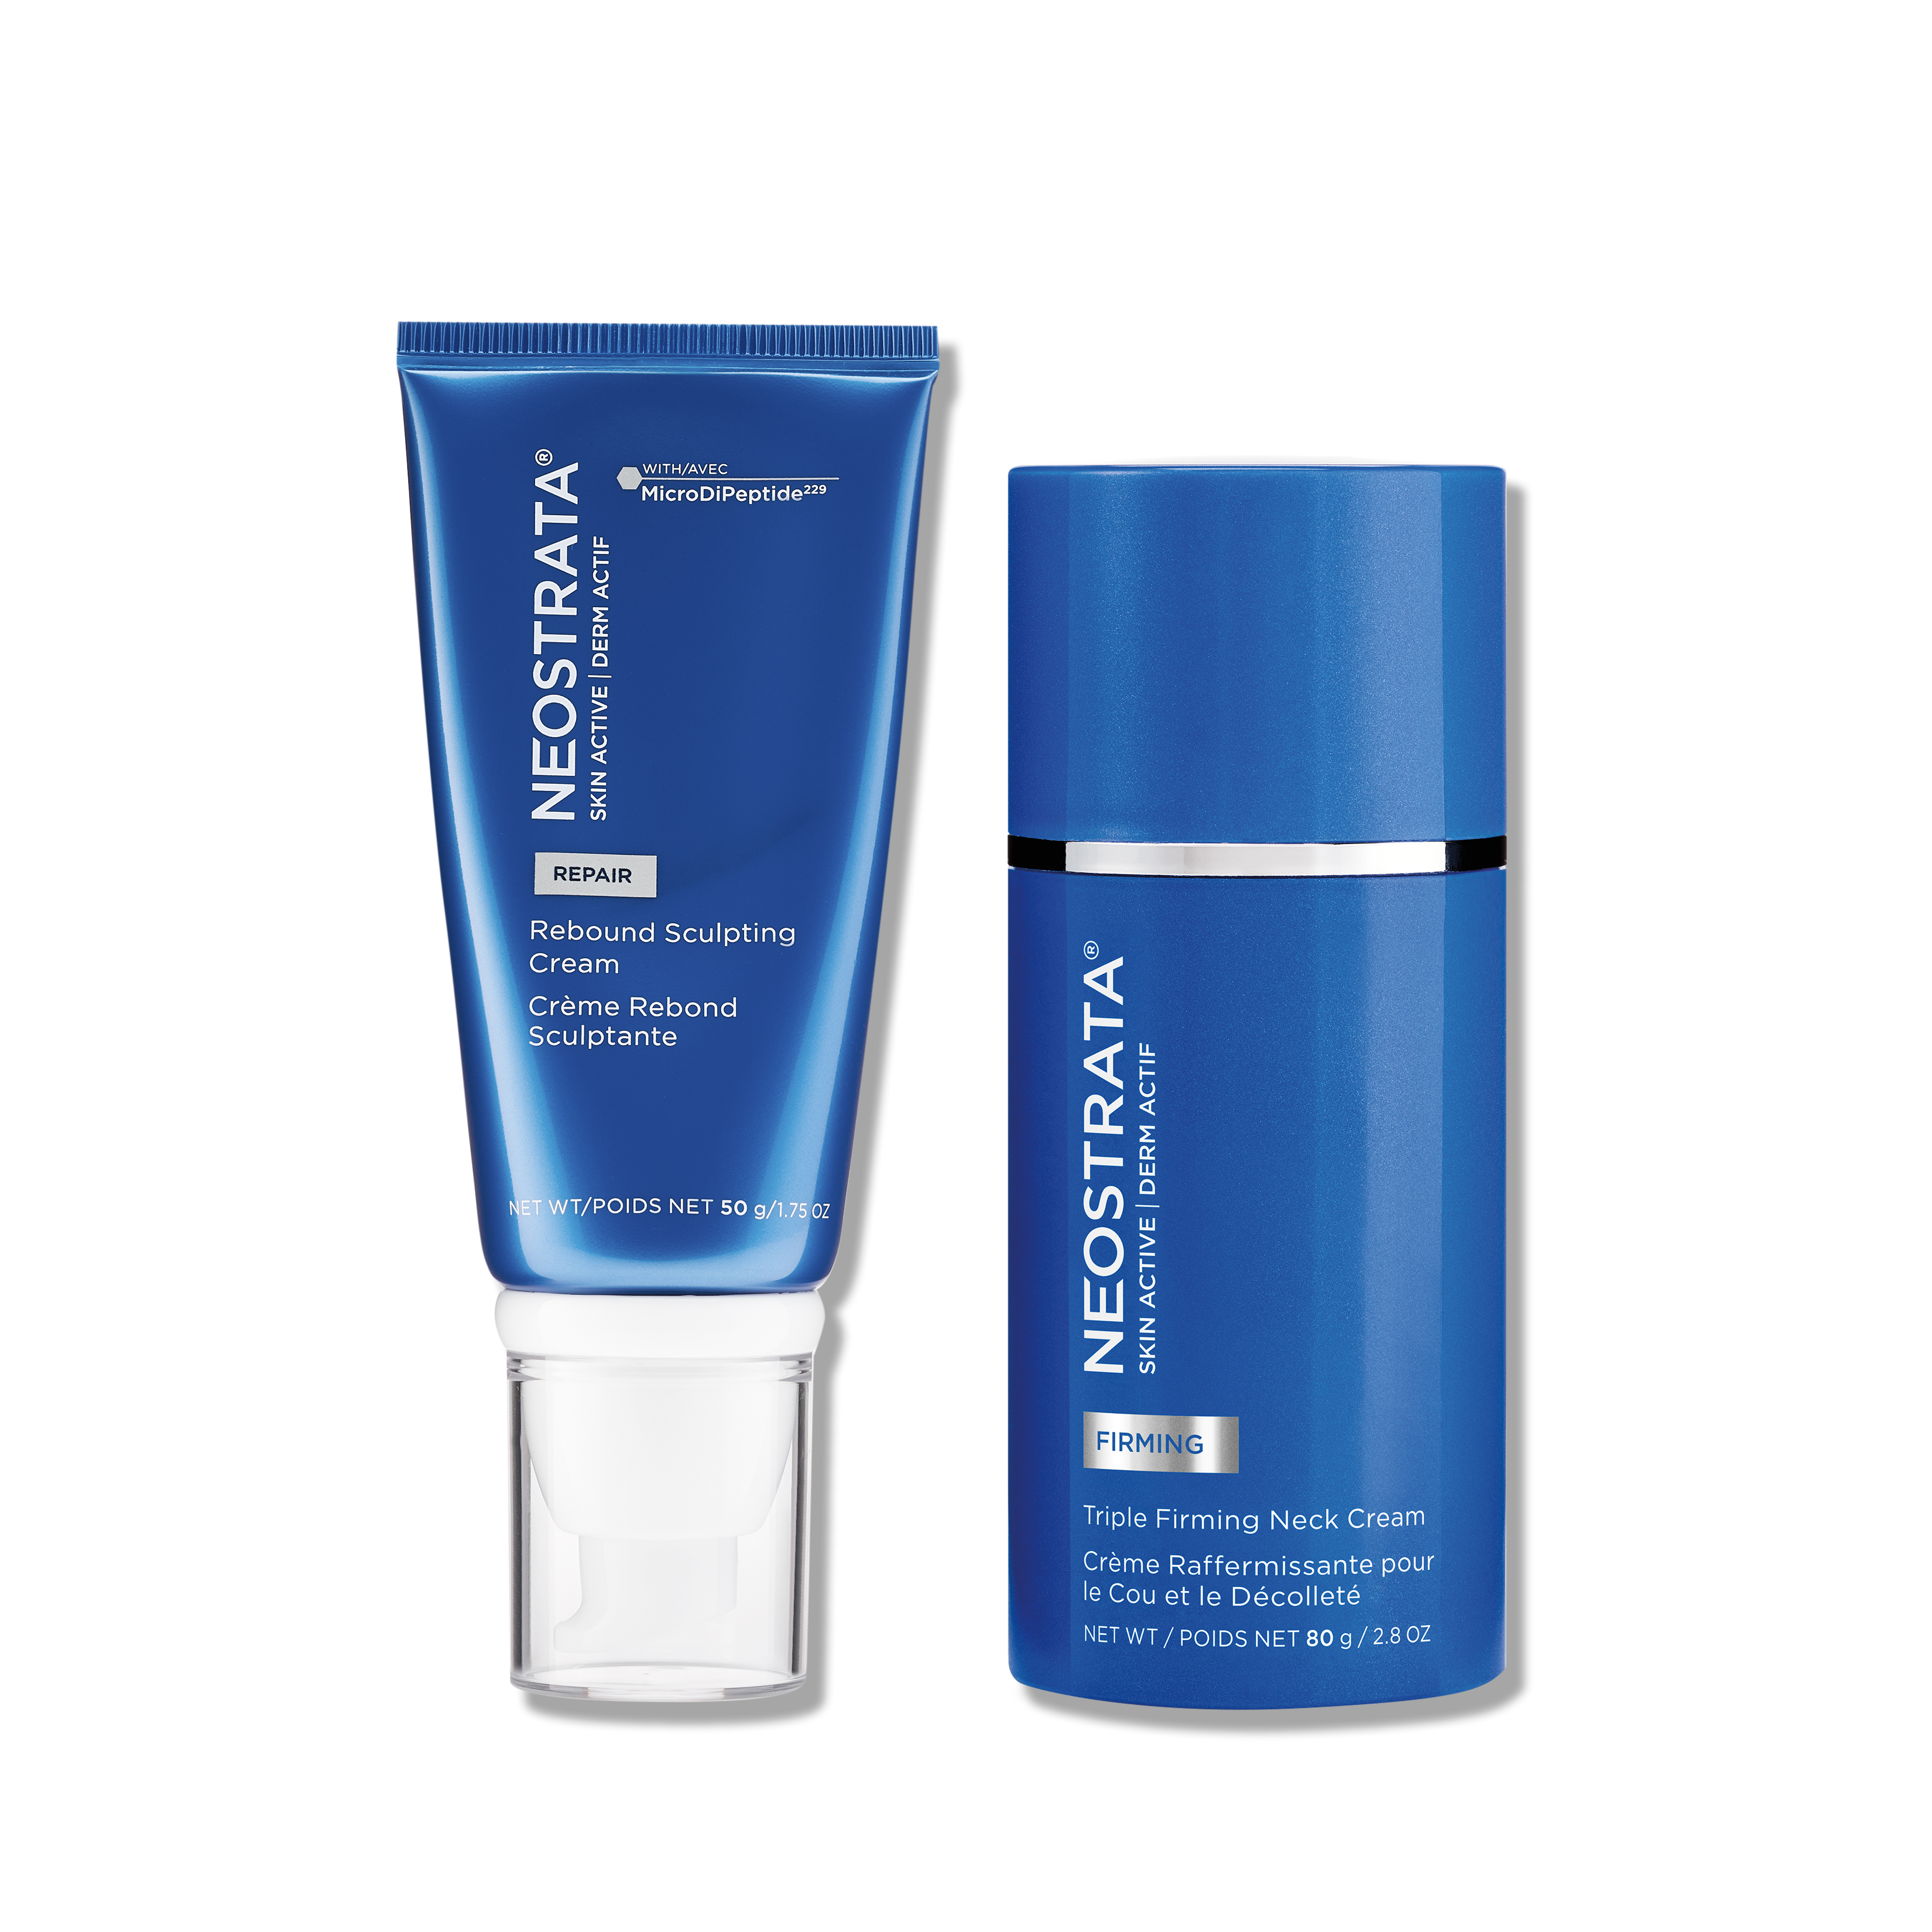 NeoStrata Get Lifted SKIN ACTIVE Duo | Need A Lift? Treat Your Face, Neck & Décolletage To A Vip Firming Treatment With New Rebound Sculpting Cream &